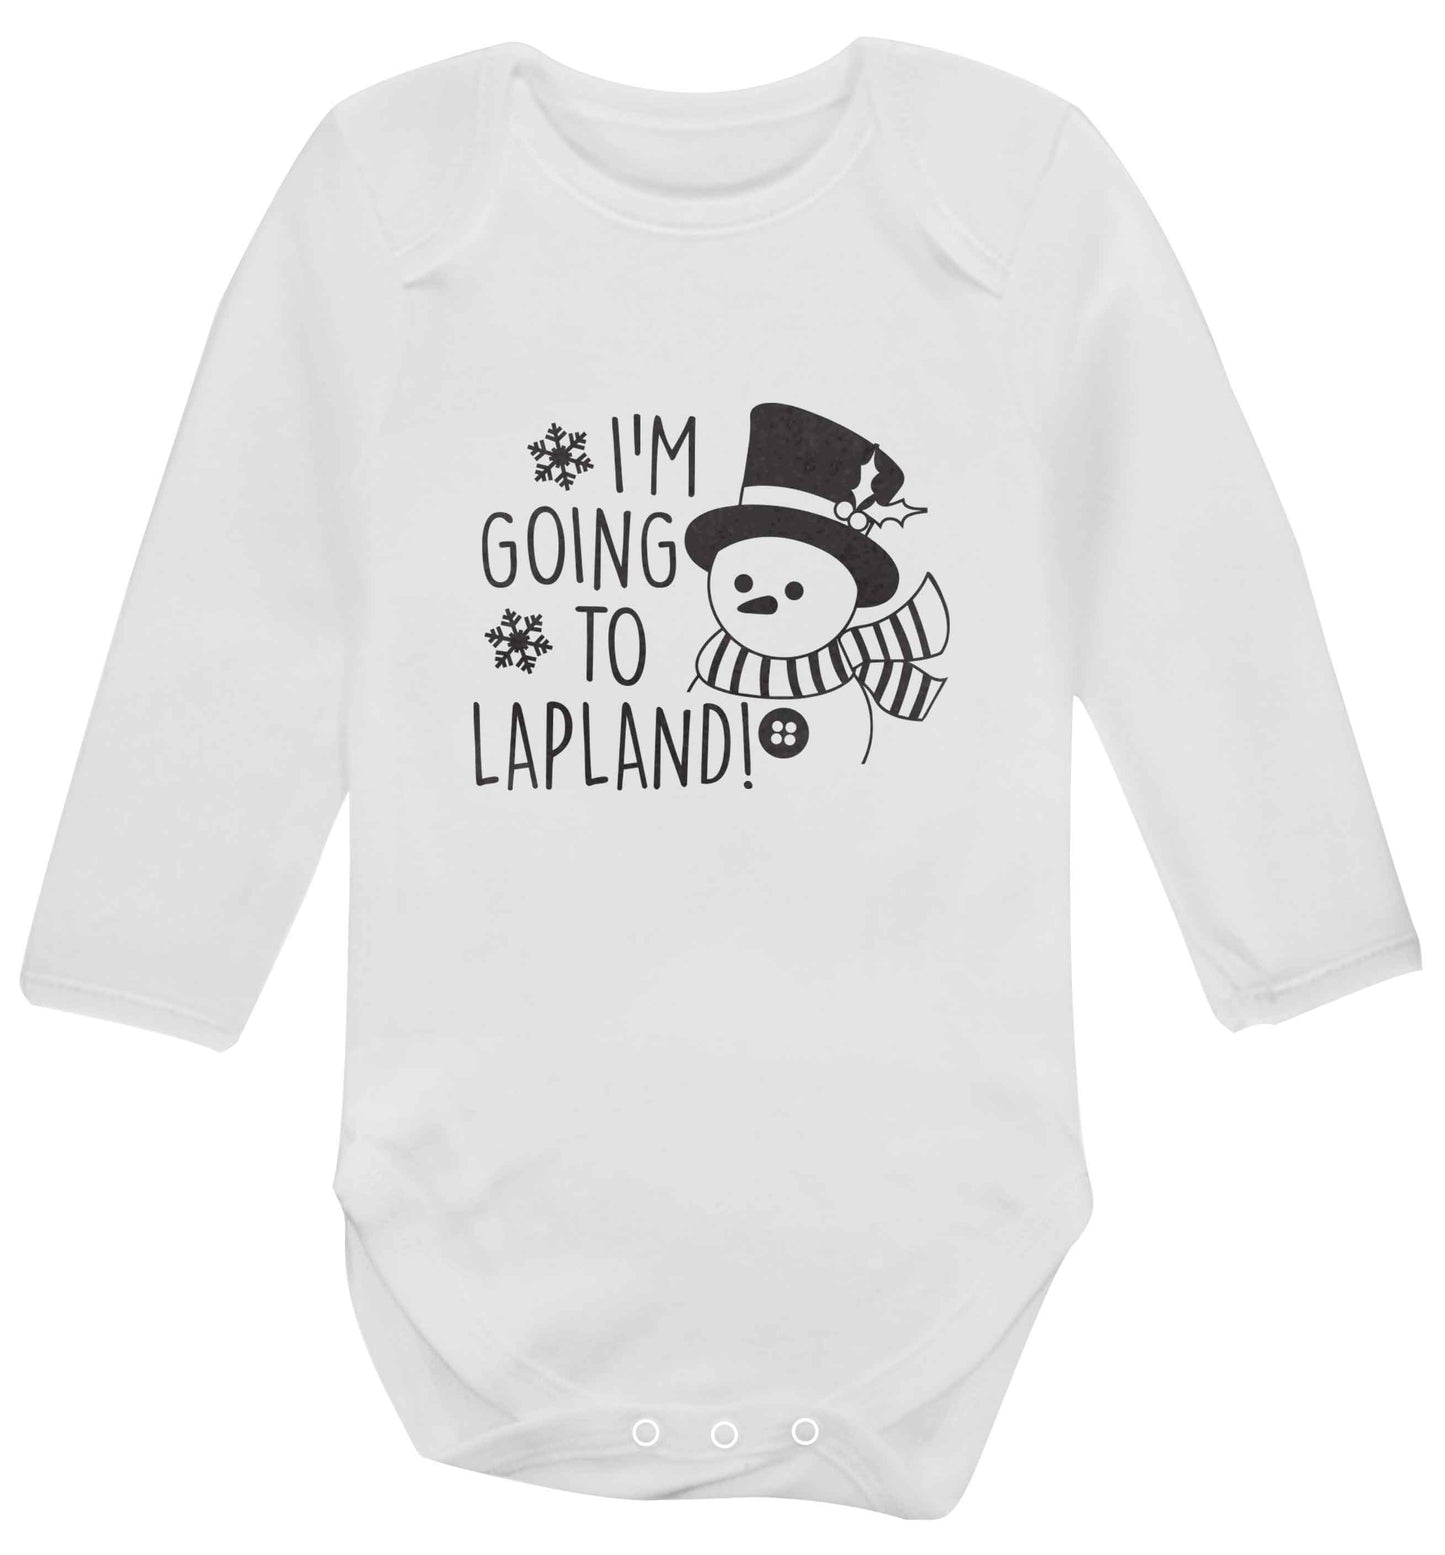 I'm going to Lapland baby vest long sleeved white 6-12 months